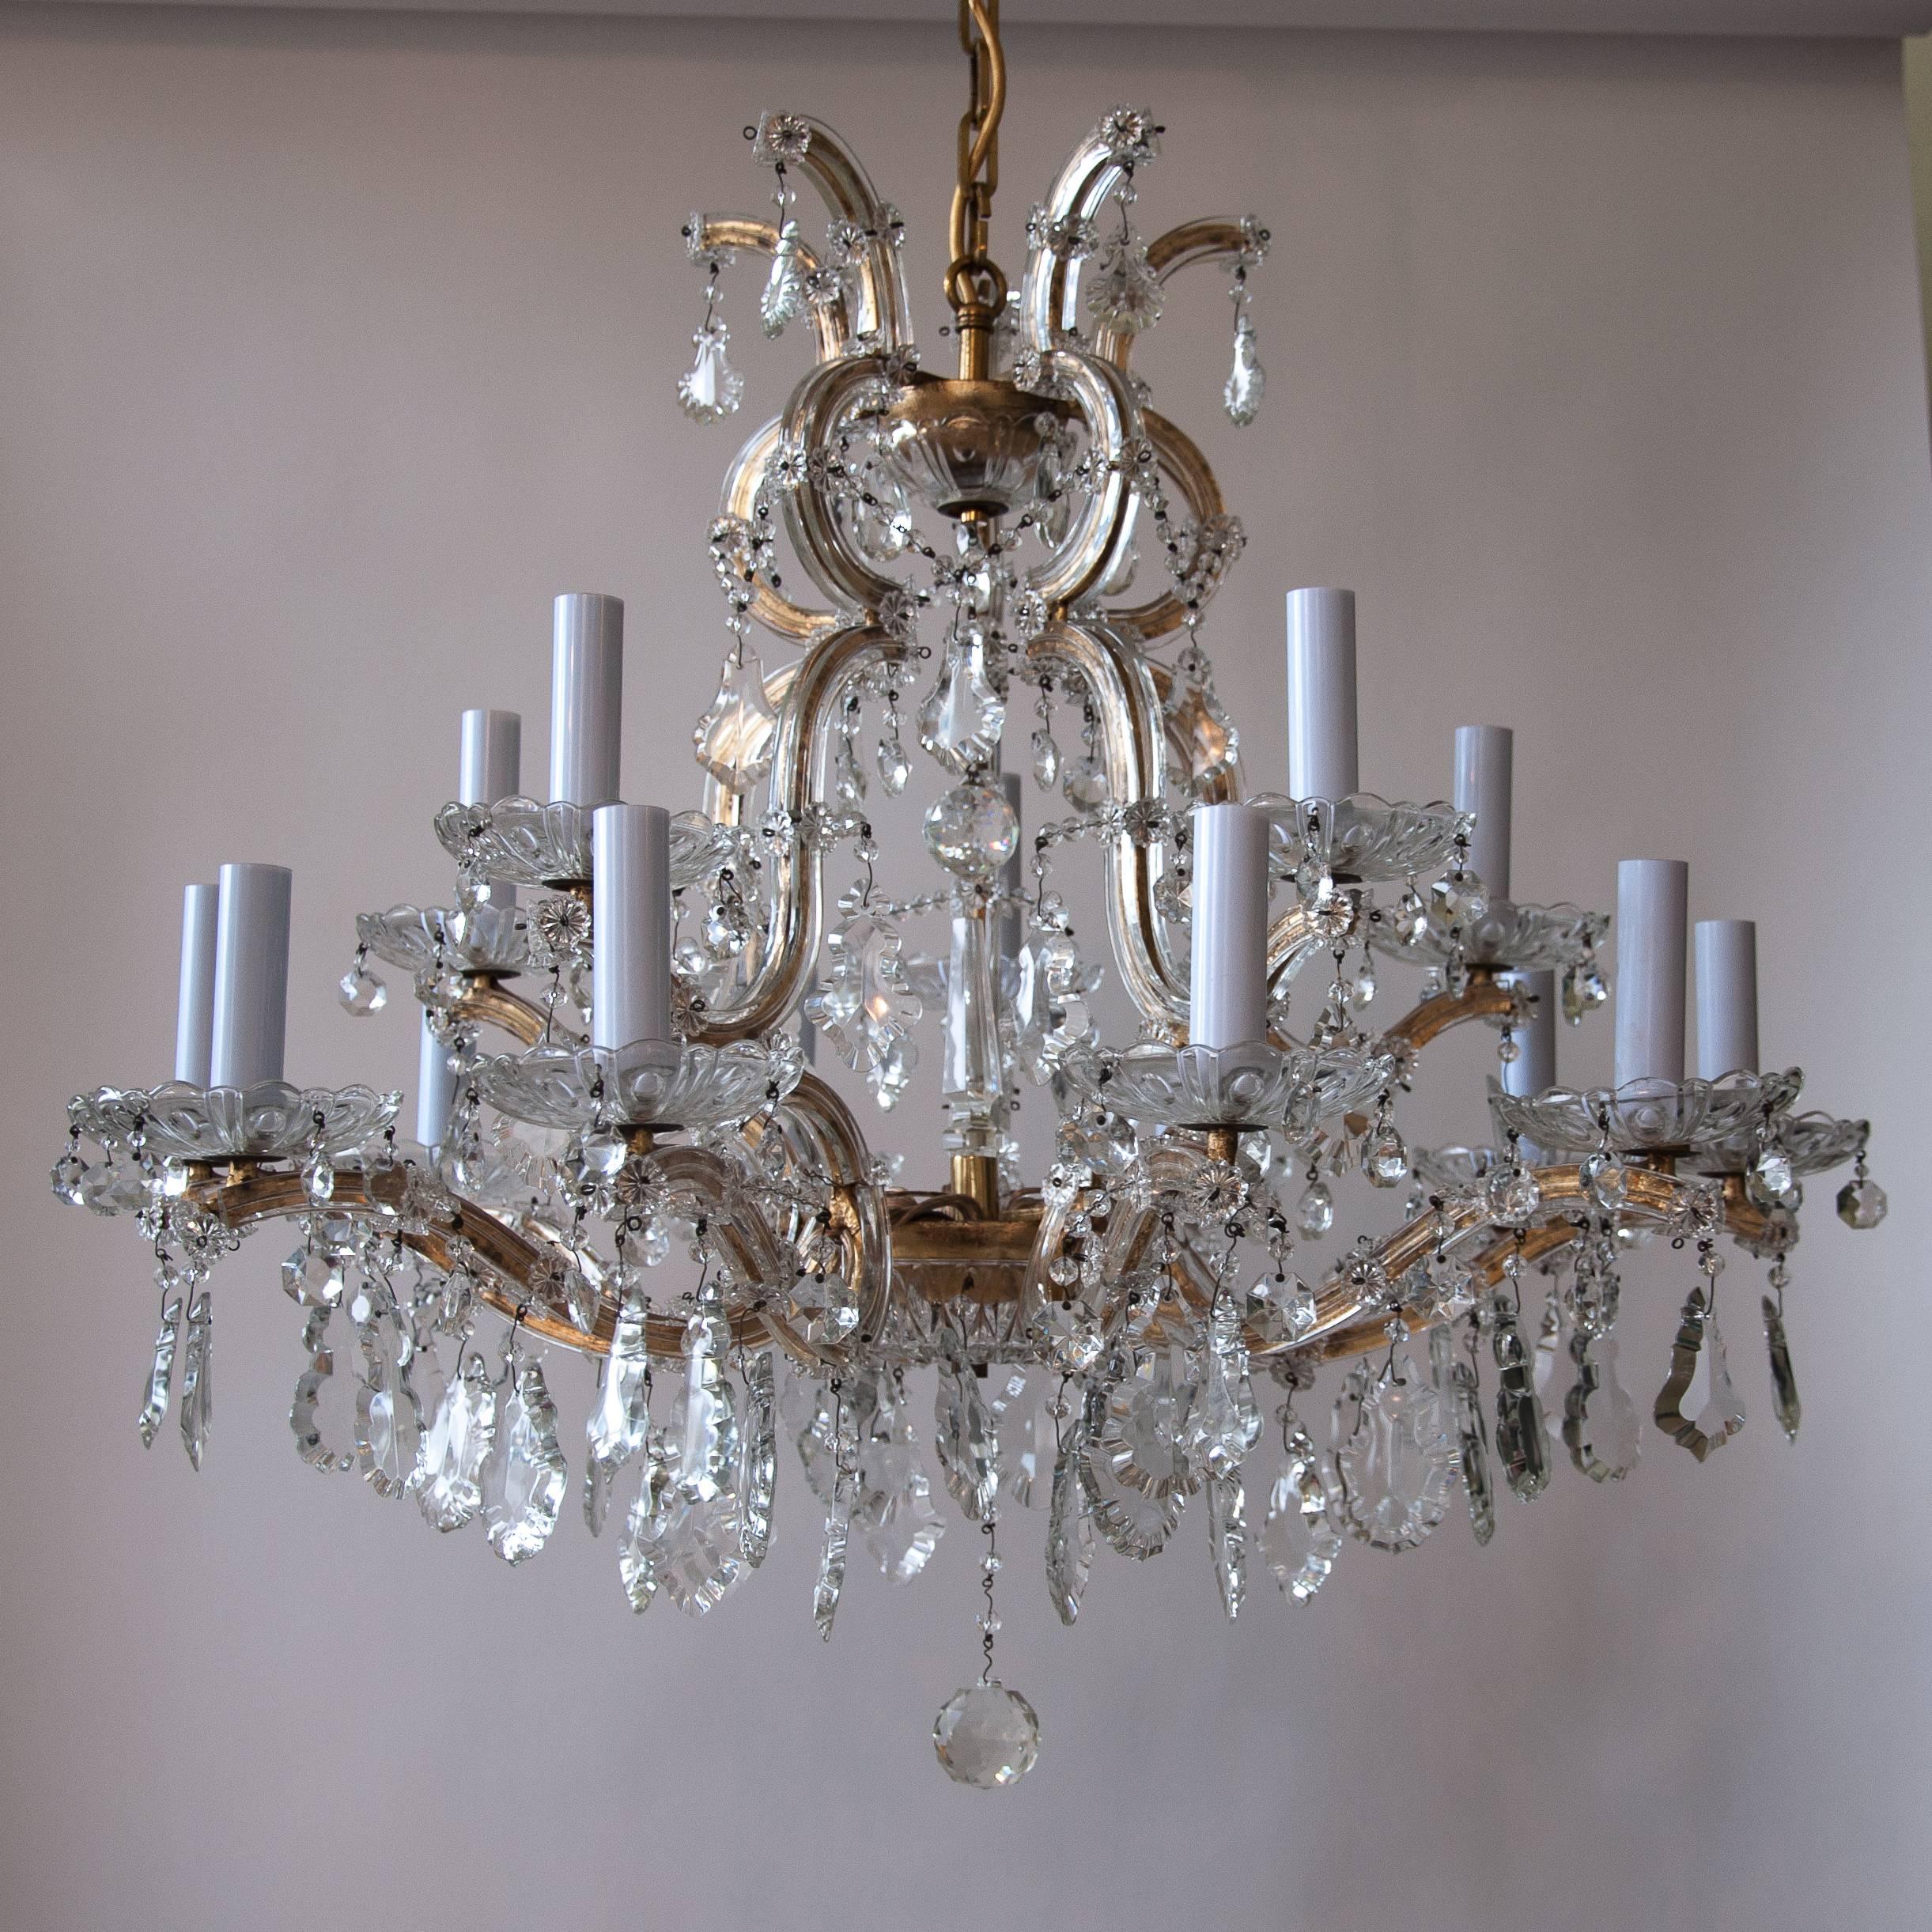 Austrian Crown Shaped Crystal Chandelier From Vienna, circa 1930 For Sale 2